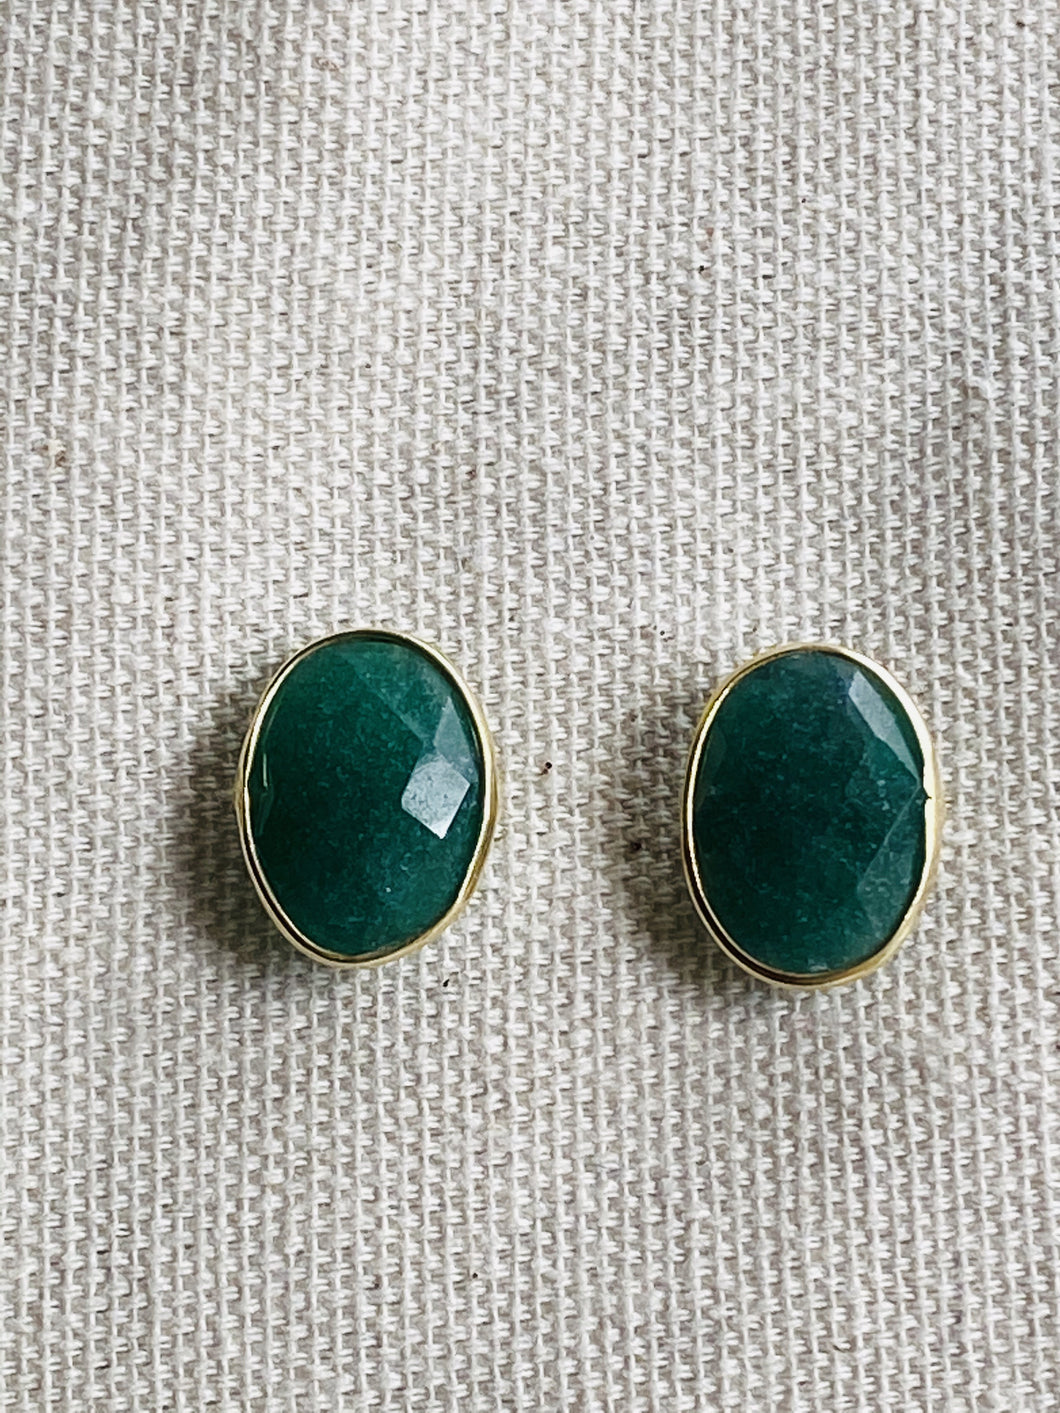 Onyx (Green) Gold on Silver Studs - Full Moon Designs